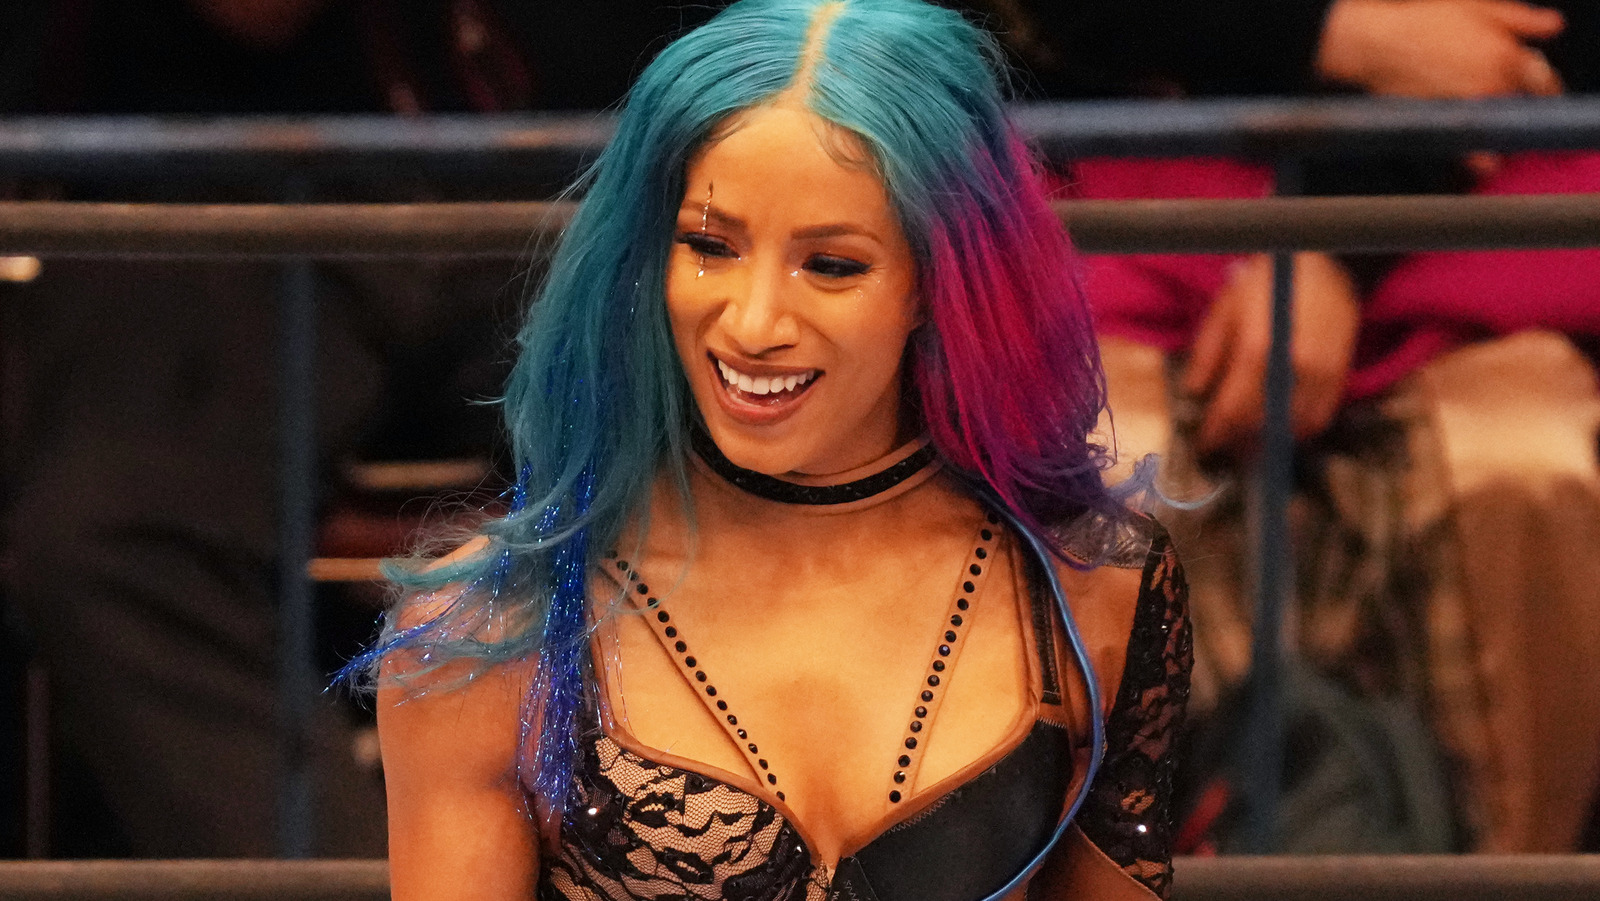 Mercedes Mone Reportedly Expected To Be In Attendance For Impact Slammiversary PPV